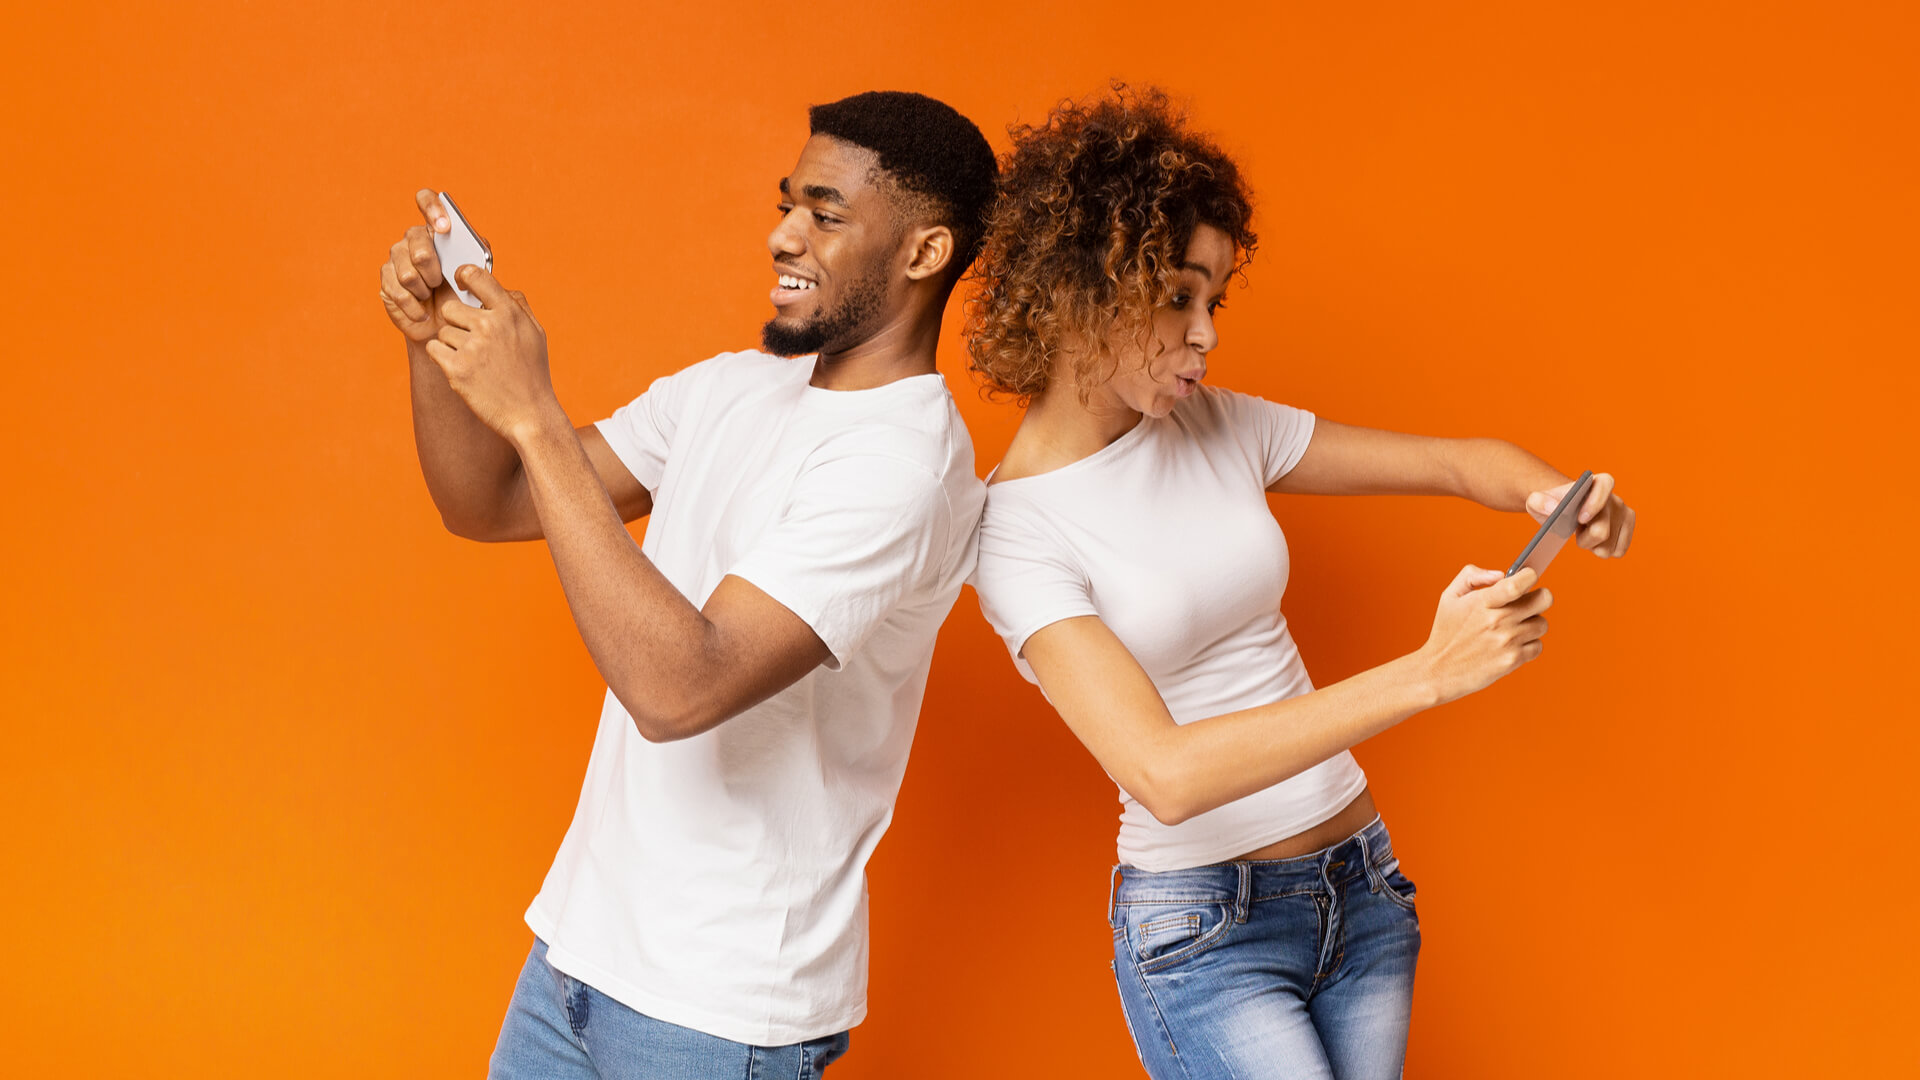 a man and women playing a video game on cellphones on a orange background